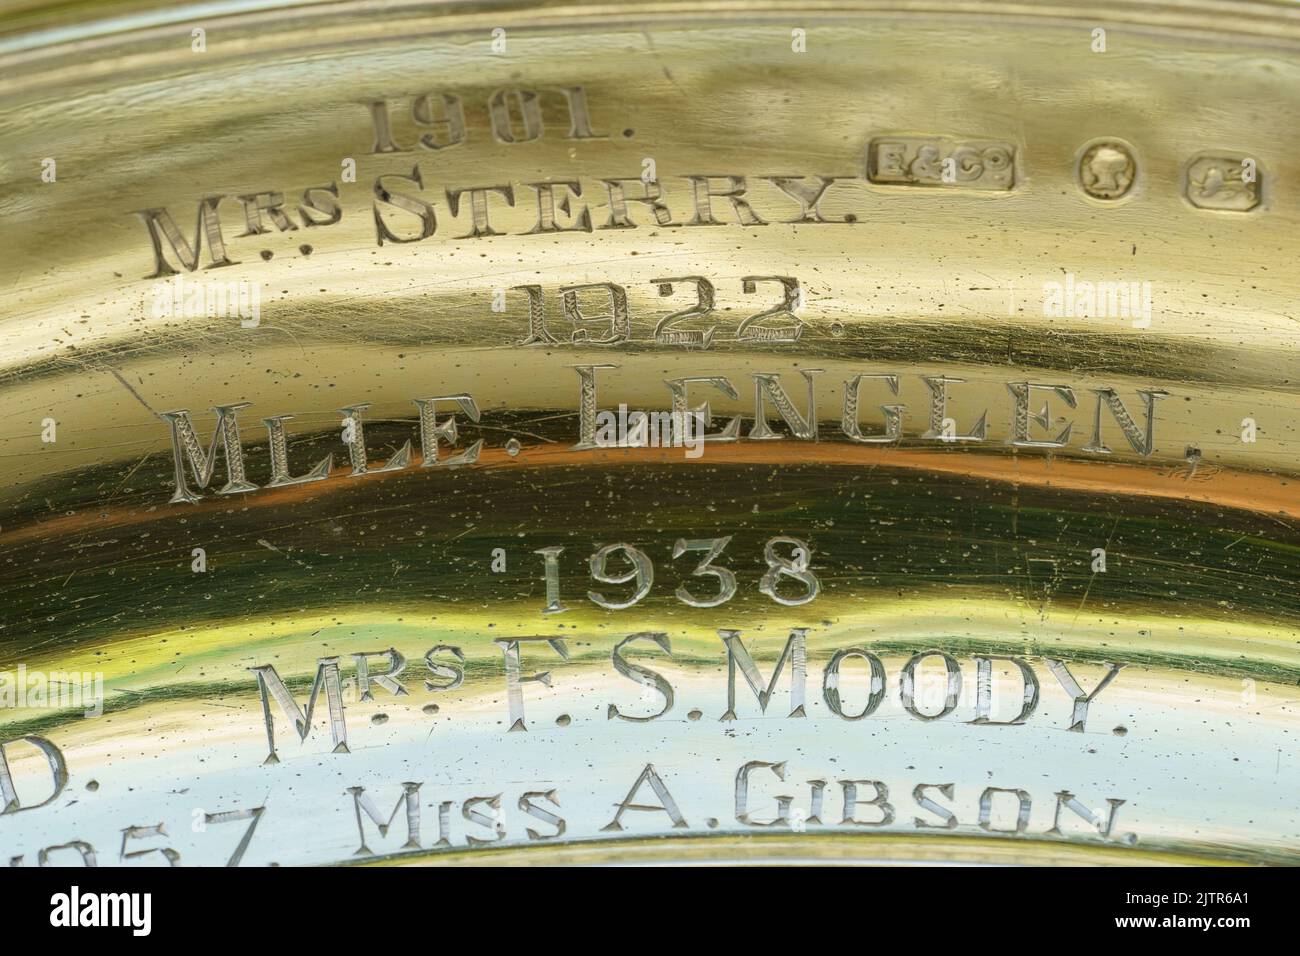 Detail of the engraving 1901 Miss Sterry, 1922 Mlle Lenglen and 1938 Mrs Moody on the Venus Rosewater Dish, the Wimbledon Ladies' Singles Trophy. Stock Photo